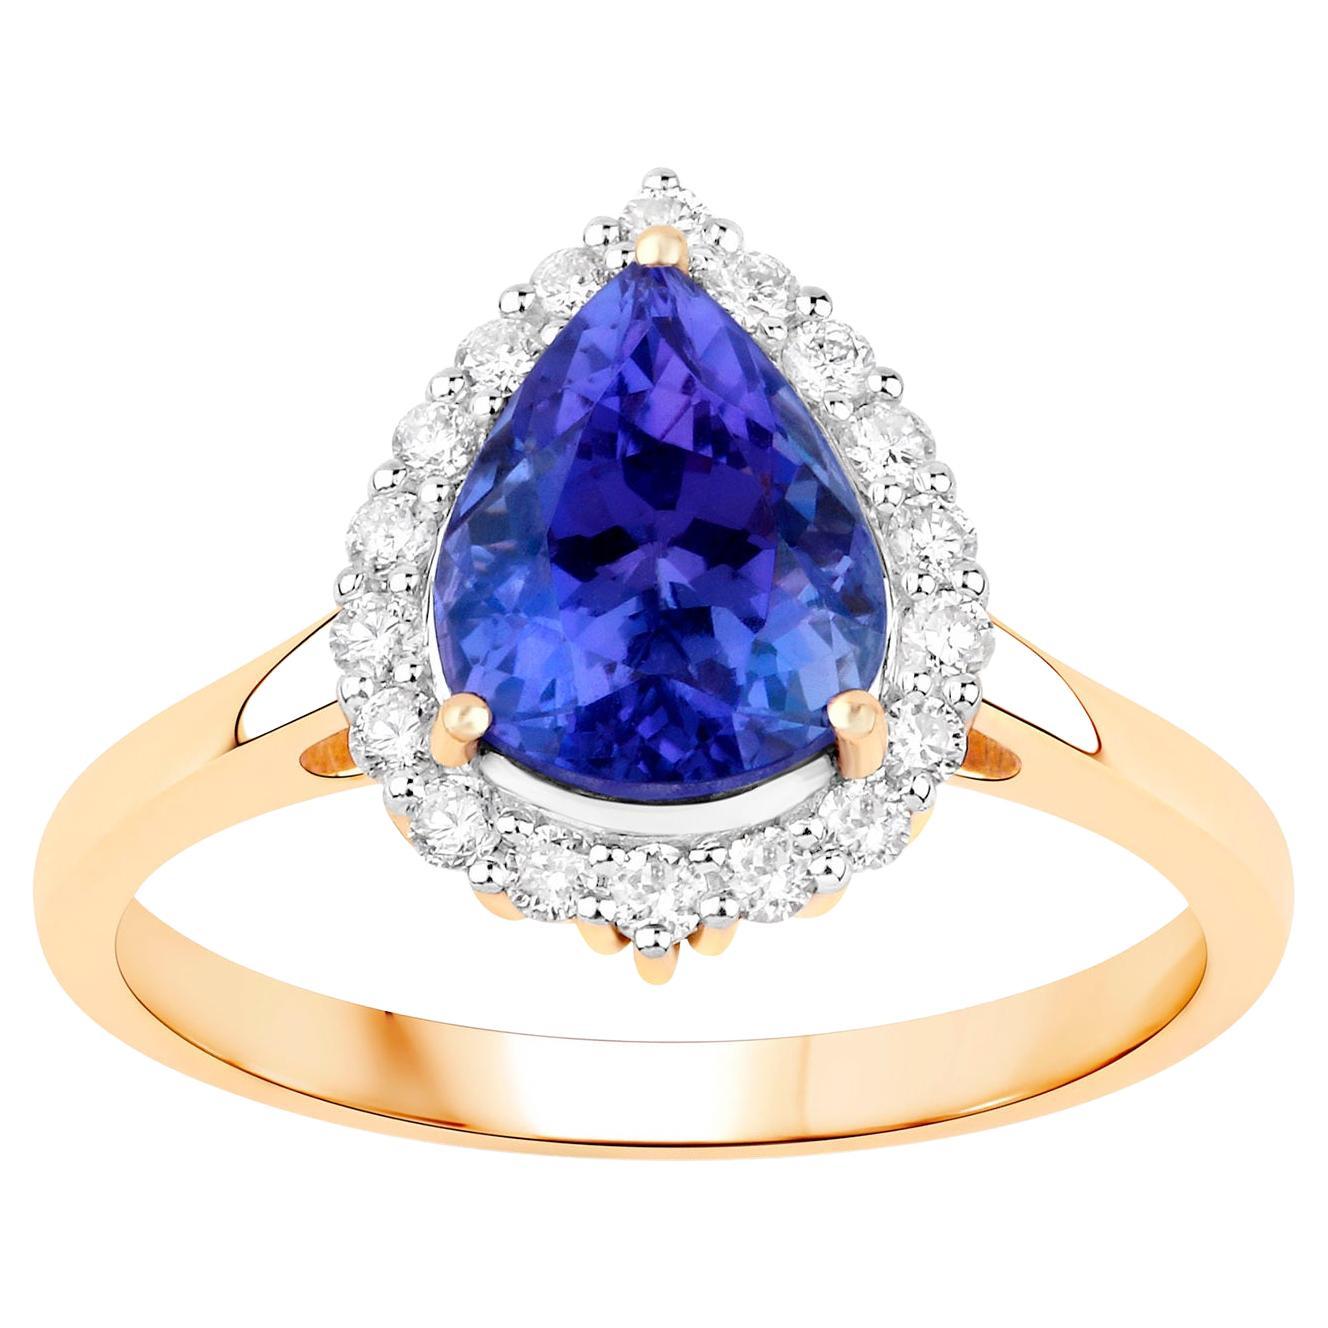 Tanzanite Ring With Diamonds 2.38 Carats 14K Yellow Gold For Sale